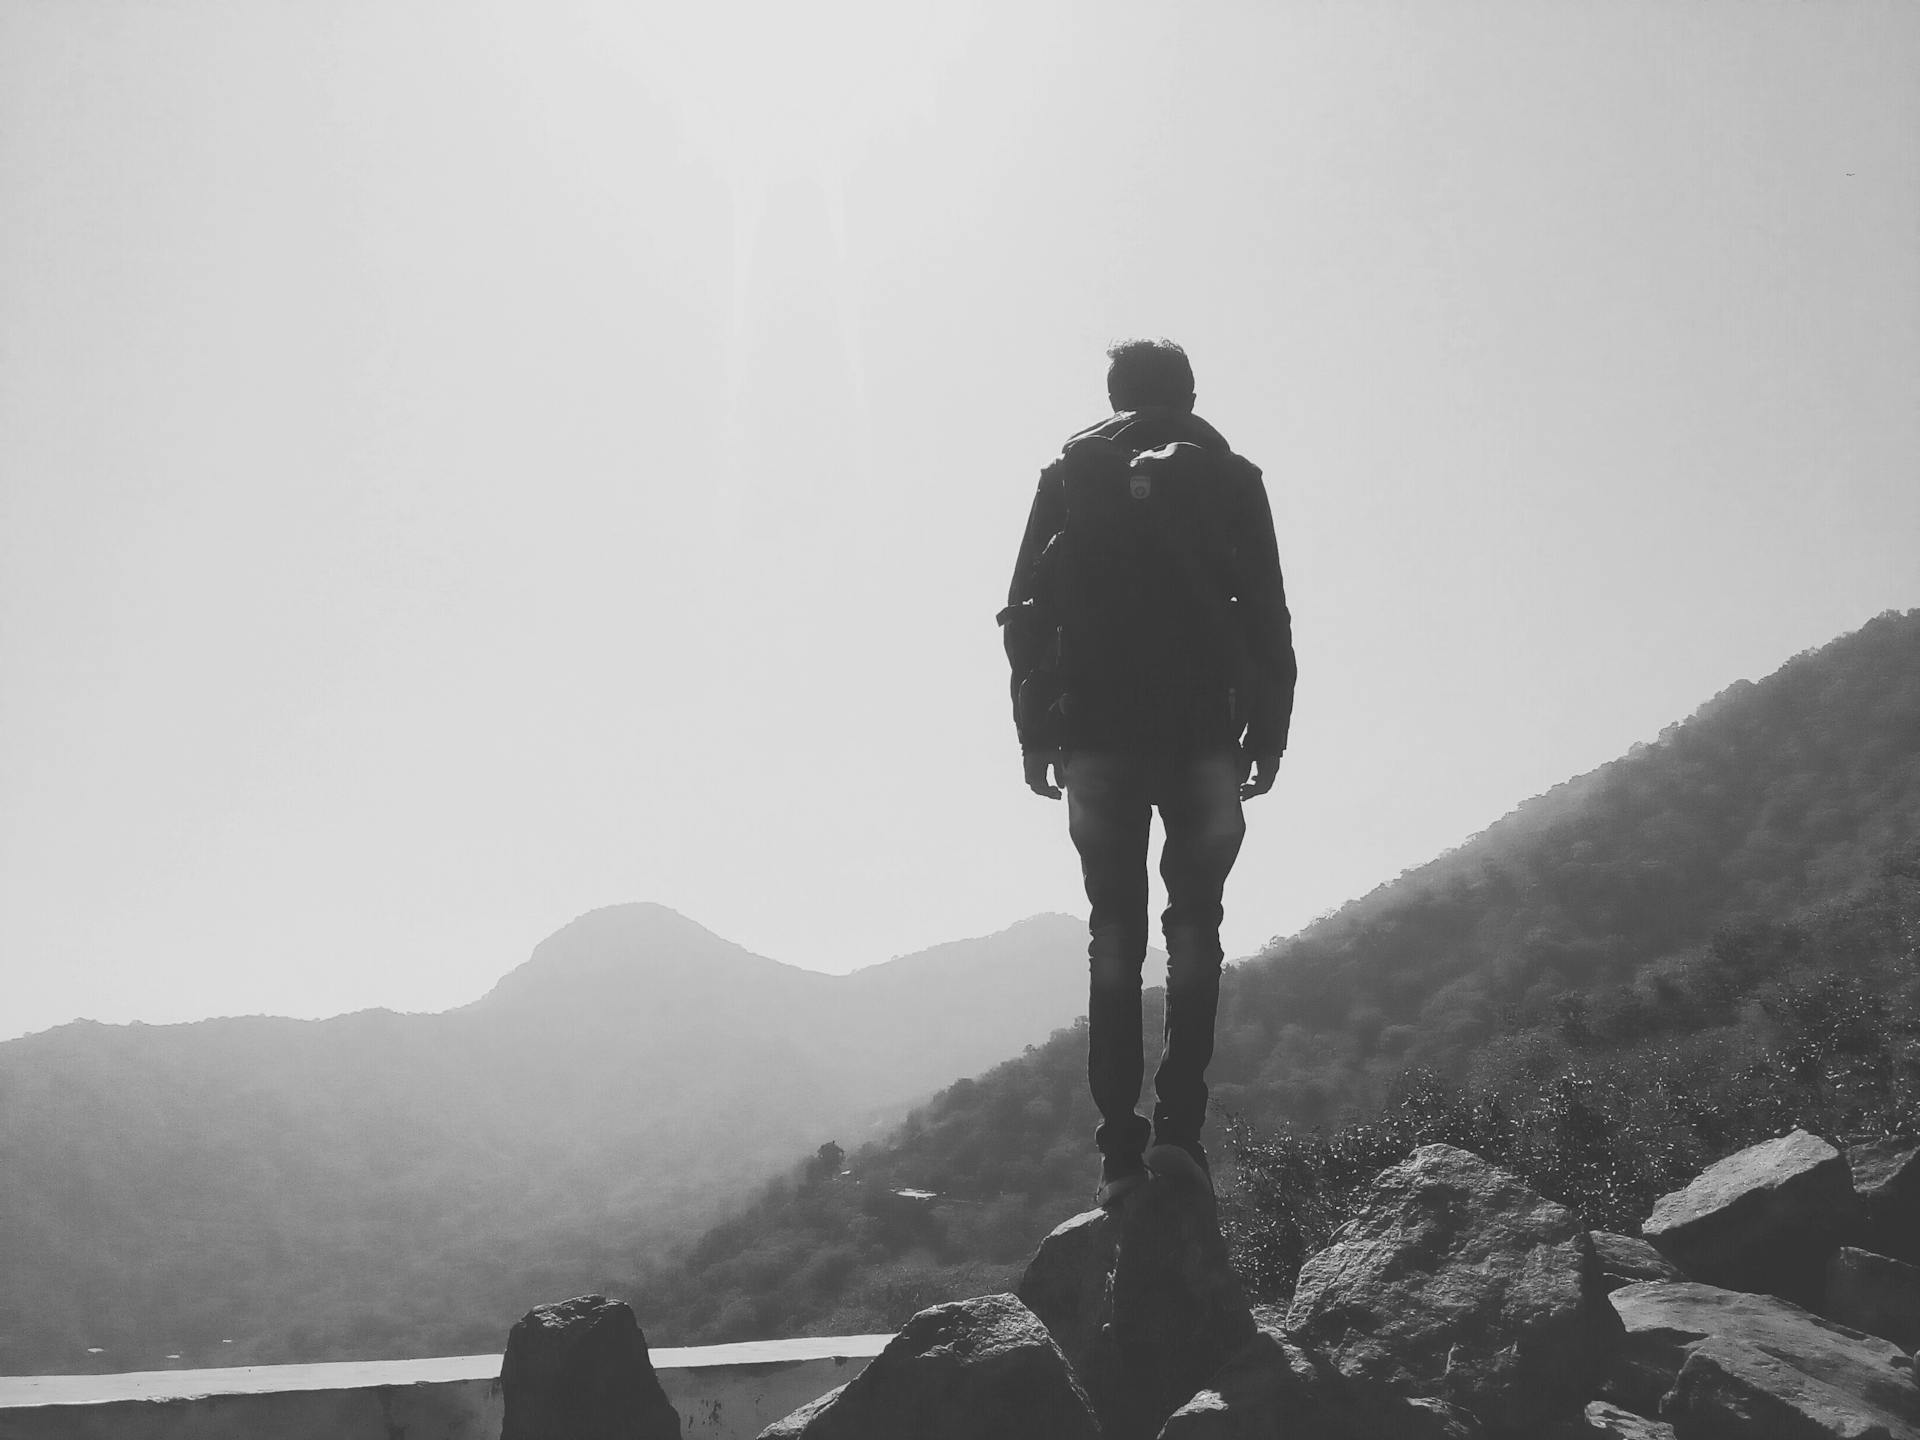 A person standing on a cliff with hiking gear | Source: Pexels